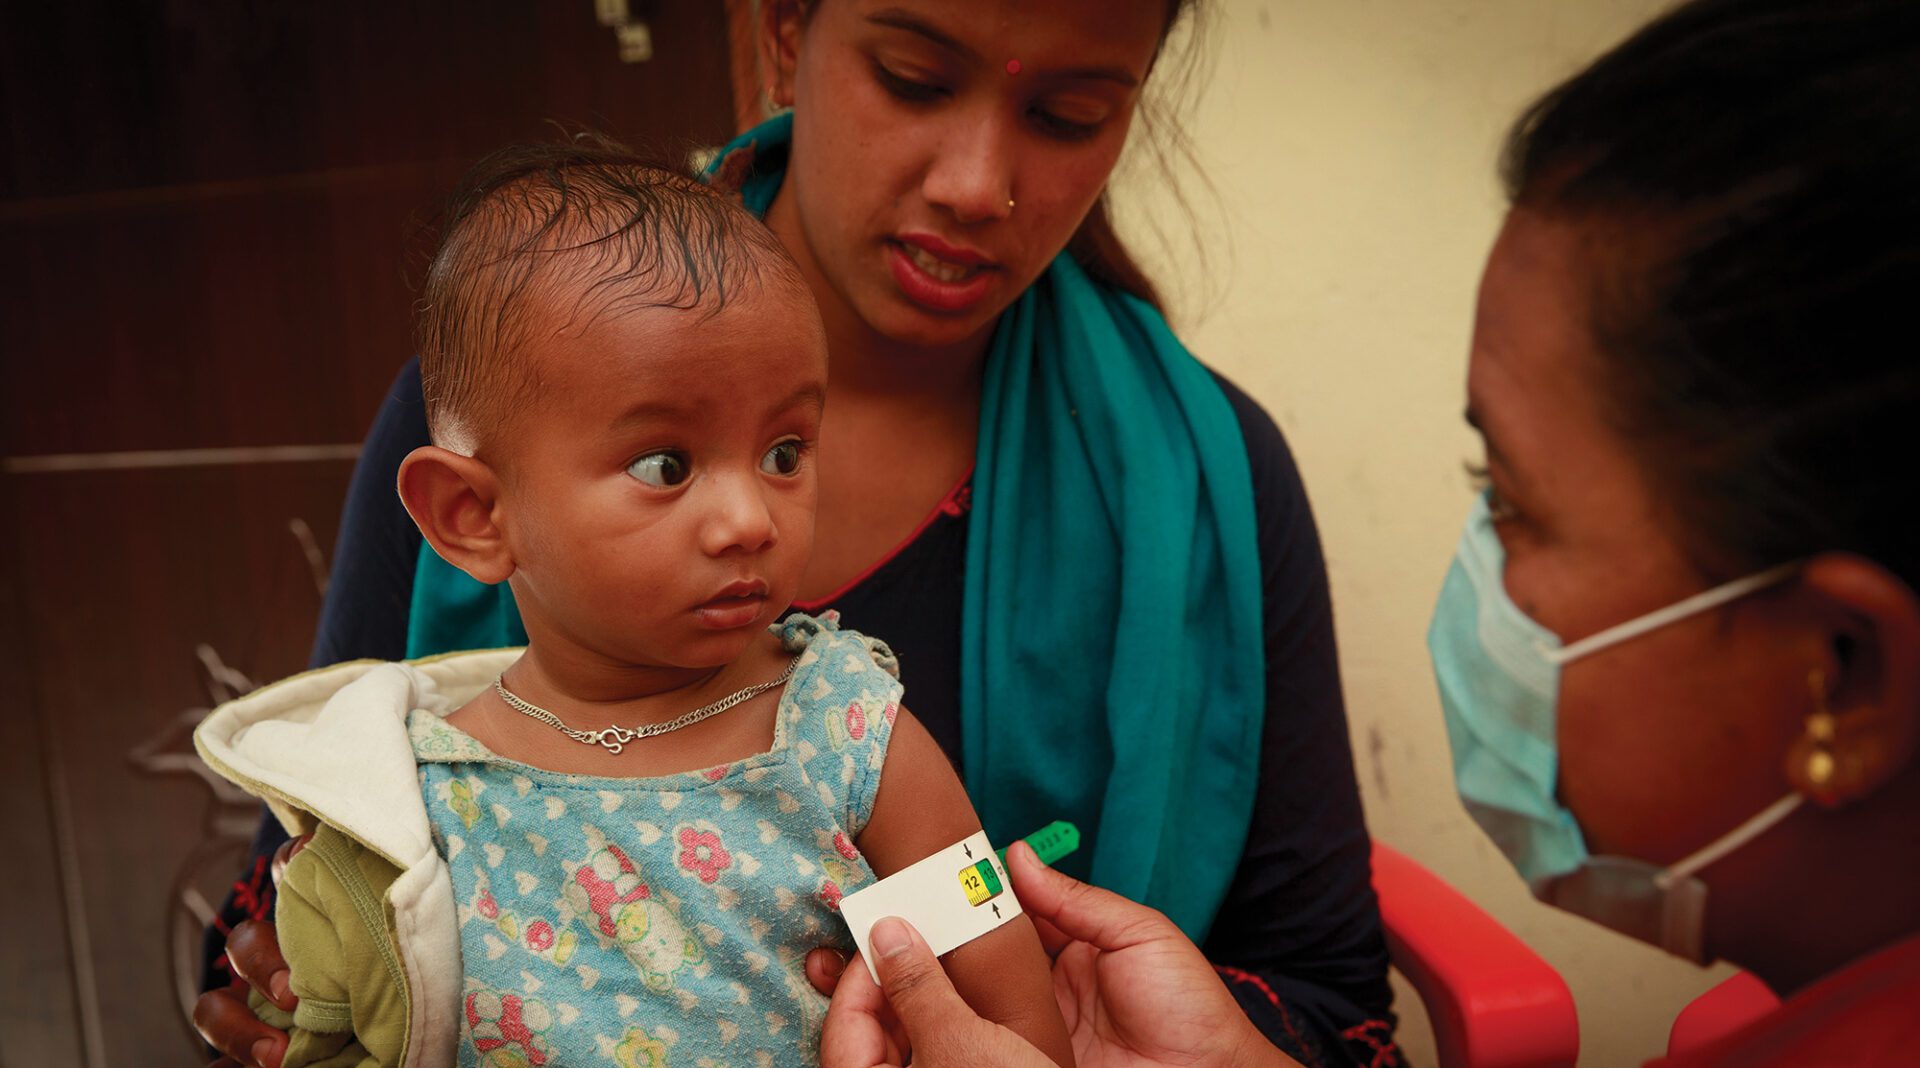 Health care worker measures a child for malnutrition.